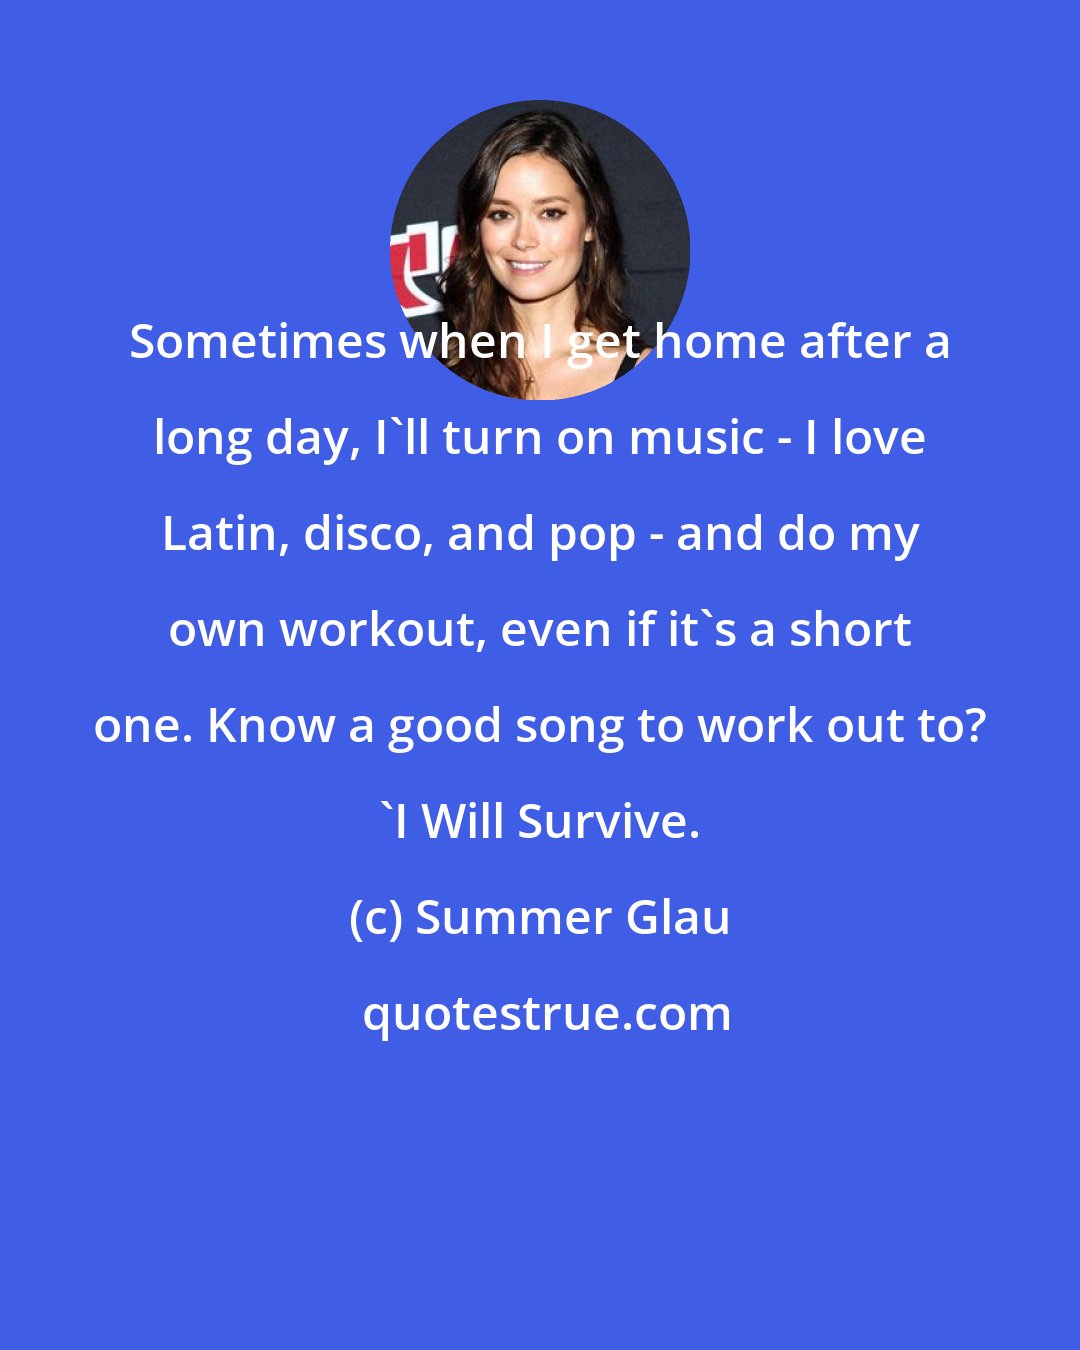 Summer Glau: Sometimes when I get home after a long day, I'll turn on music - I love Latin, disco, and pop - and do my own workout, even if it's a short one. Know a good song to work out to? 'I Will Survive.